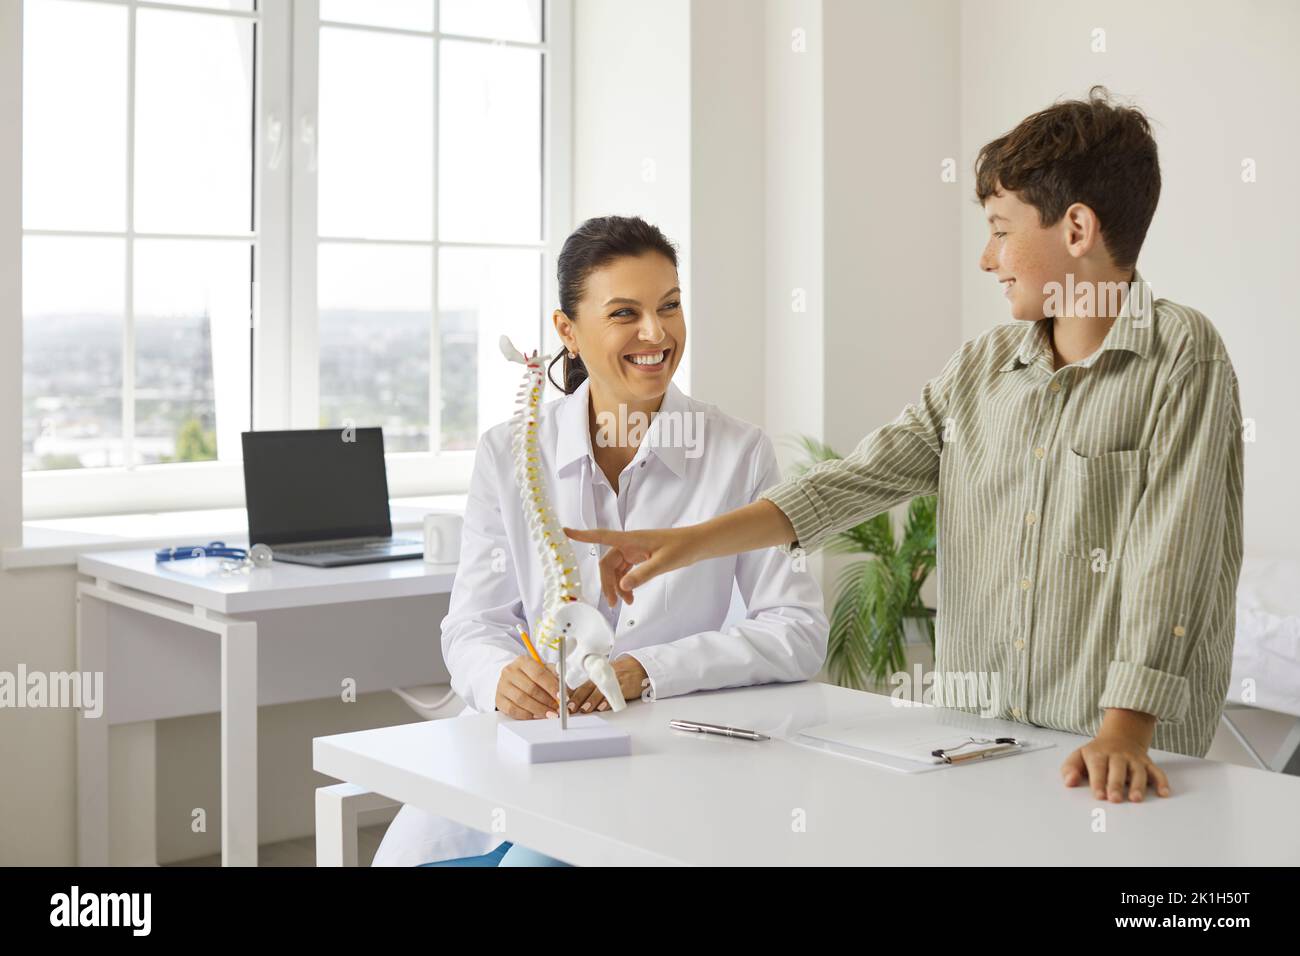 Happy, smiling child and doctor at orthopedic clinic talking about skeleton and spine Stock Photo